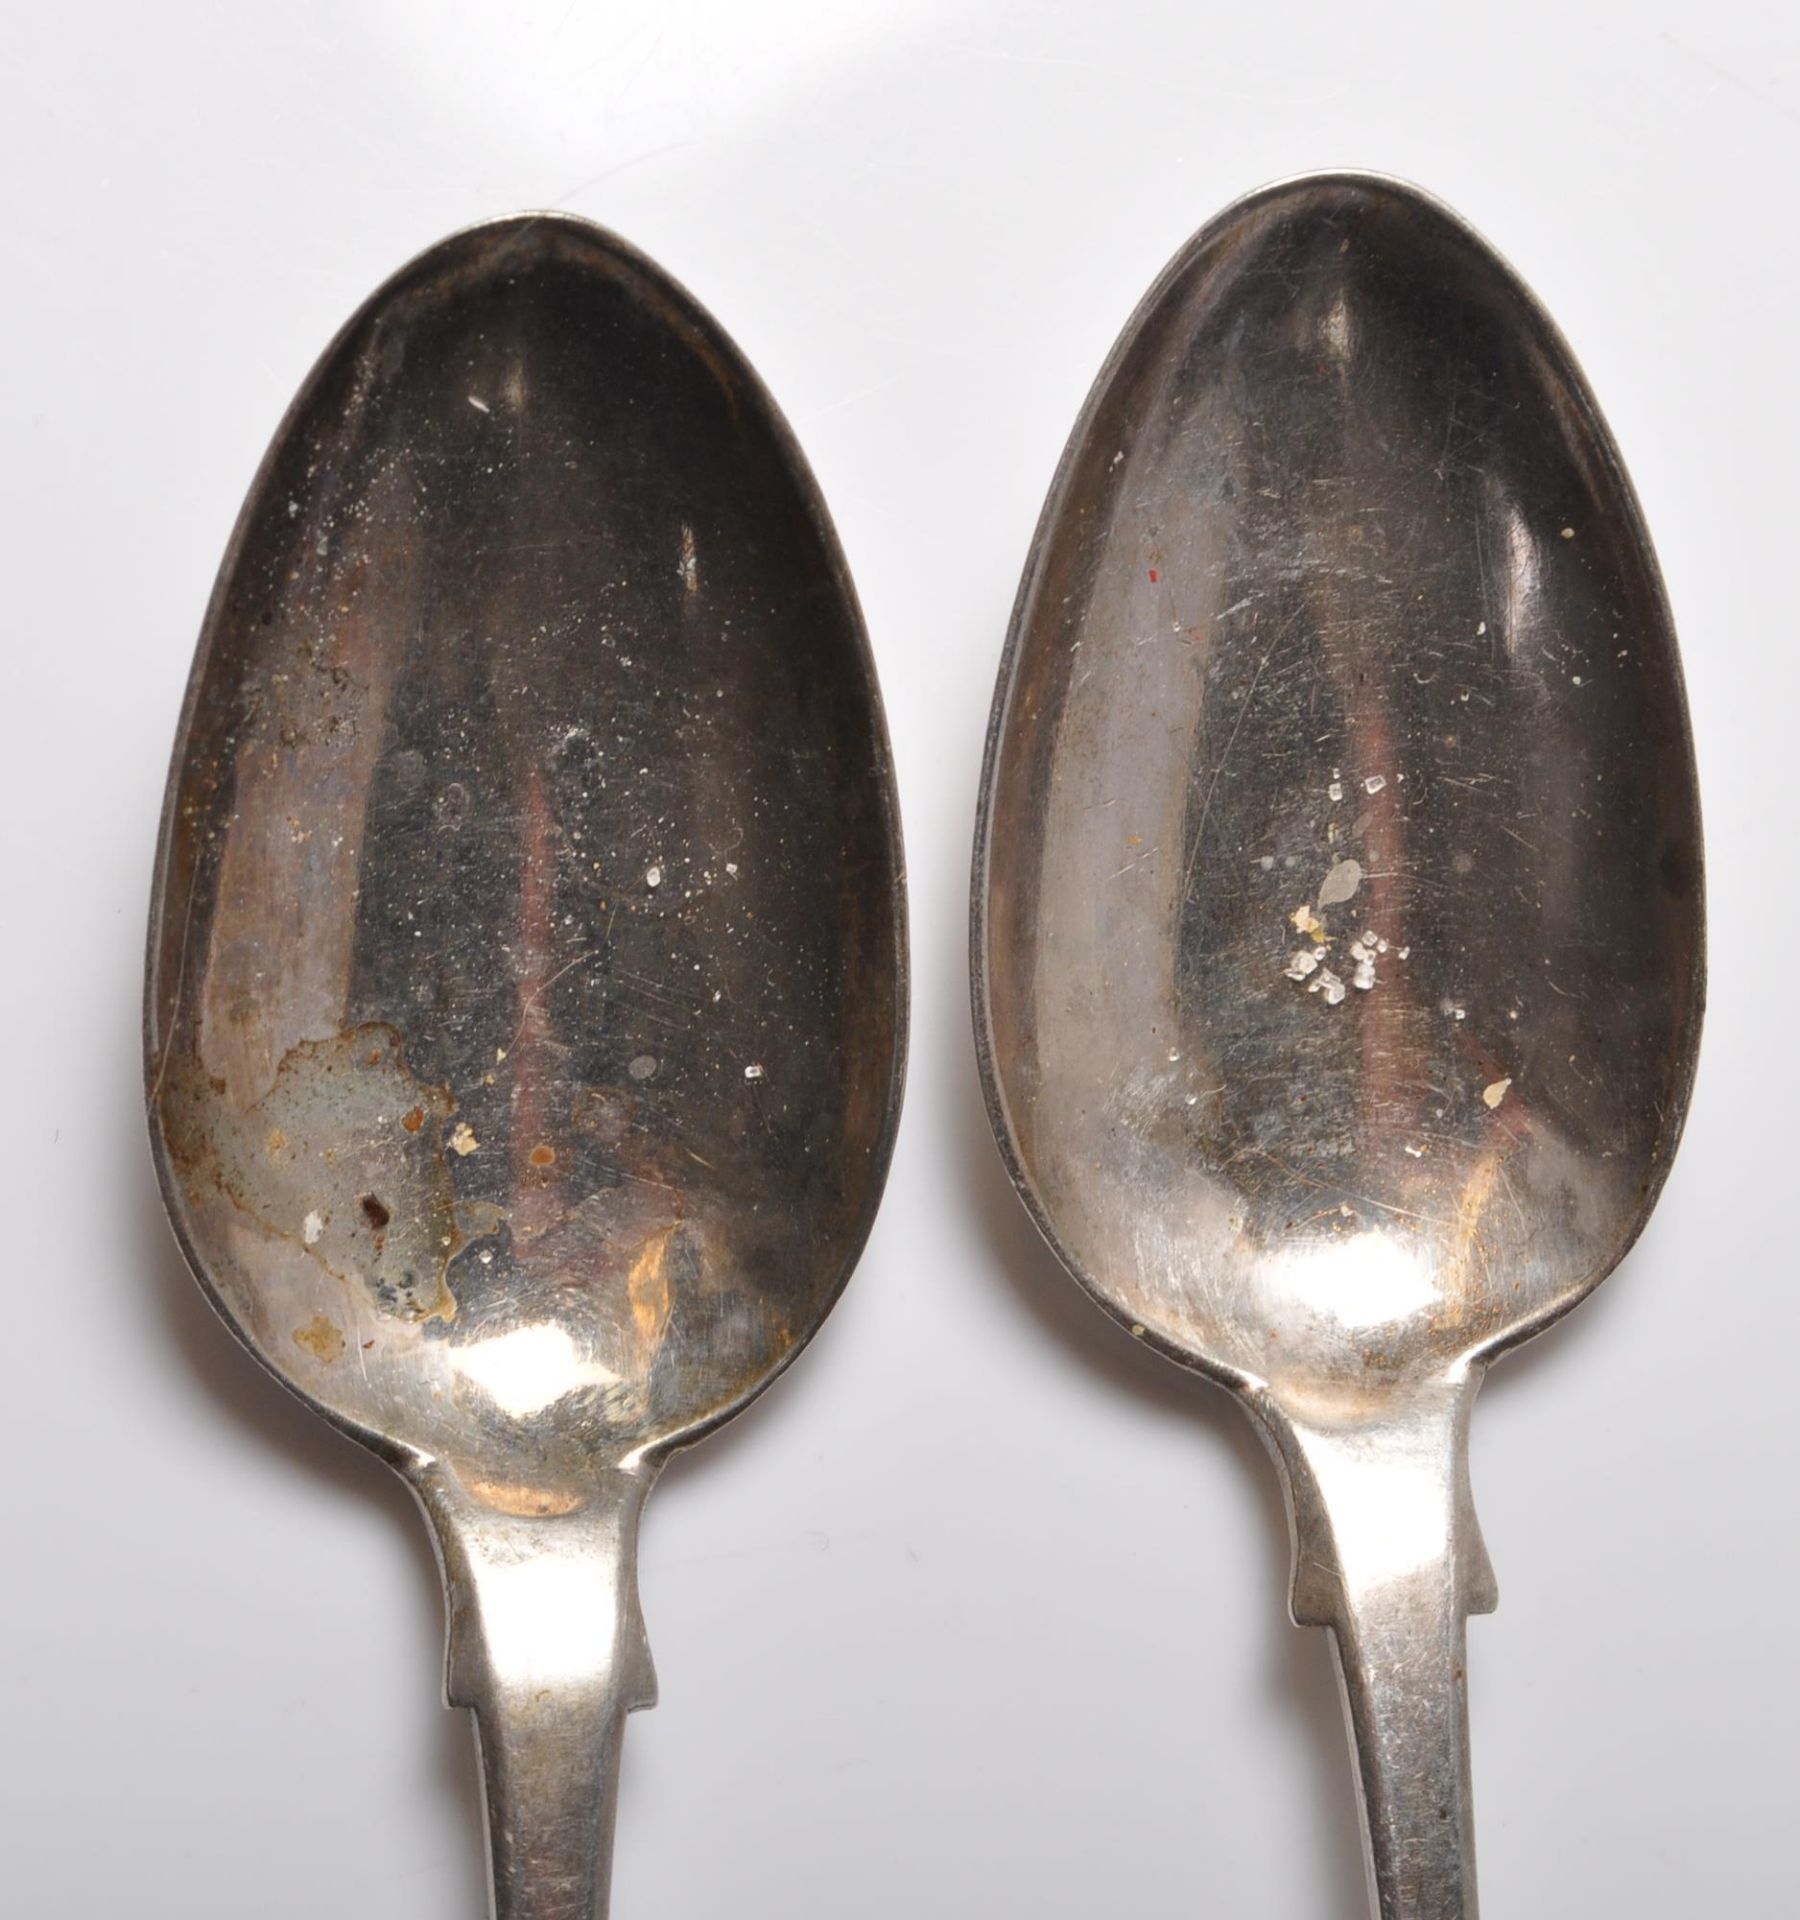 PAIR OF GEROGIAN SCOTTISH PROVINCIAL SILVER SPOONS - Image 4 of 6